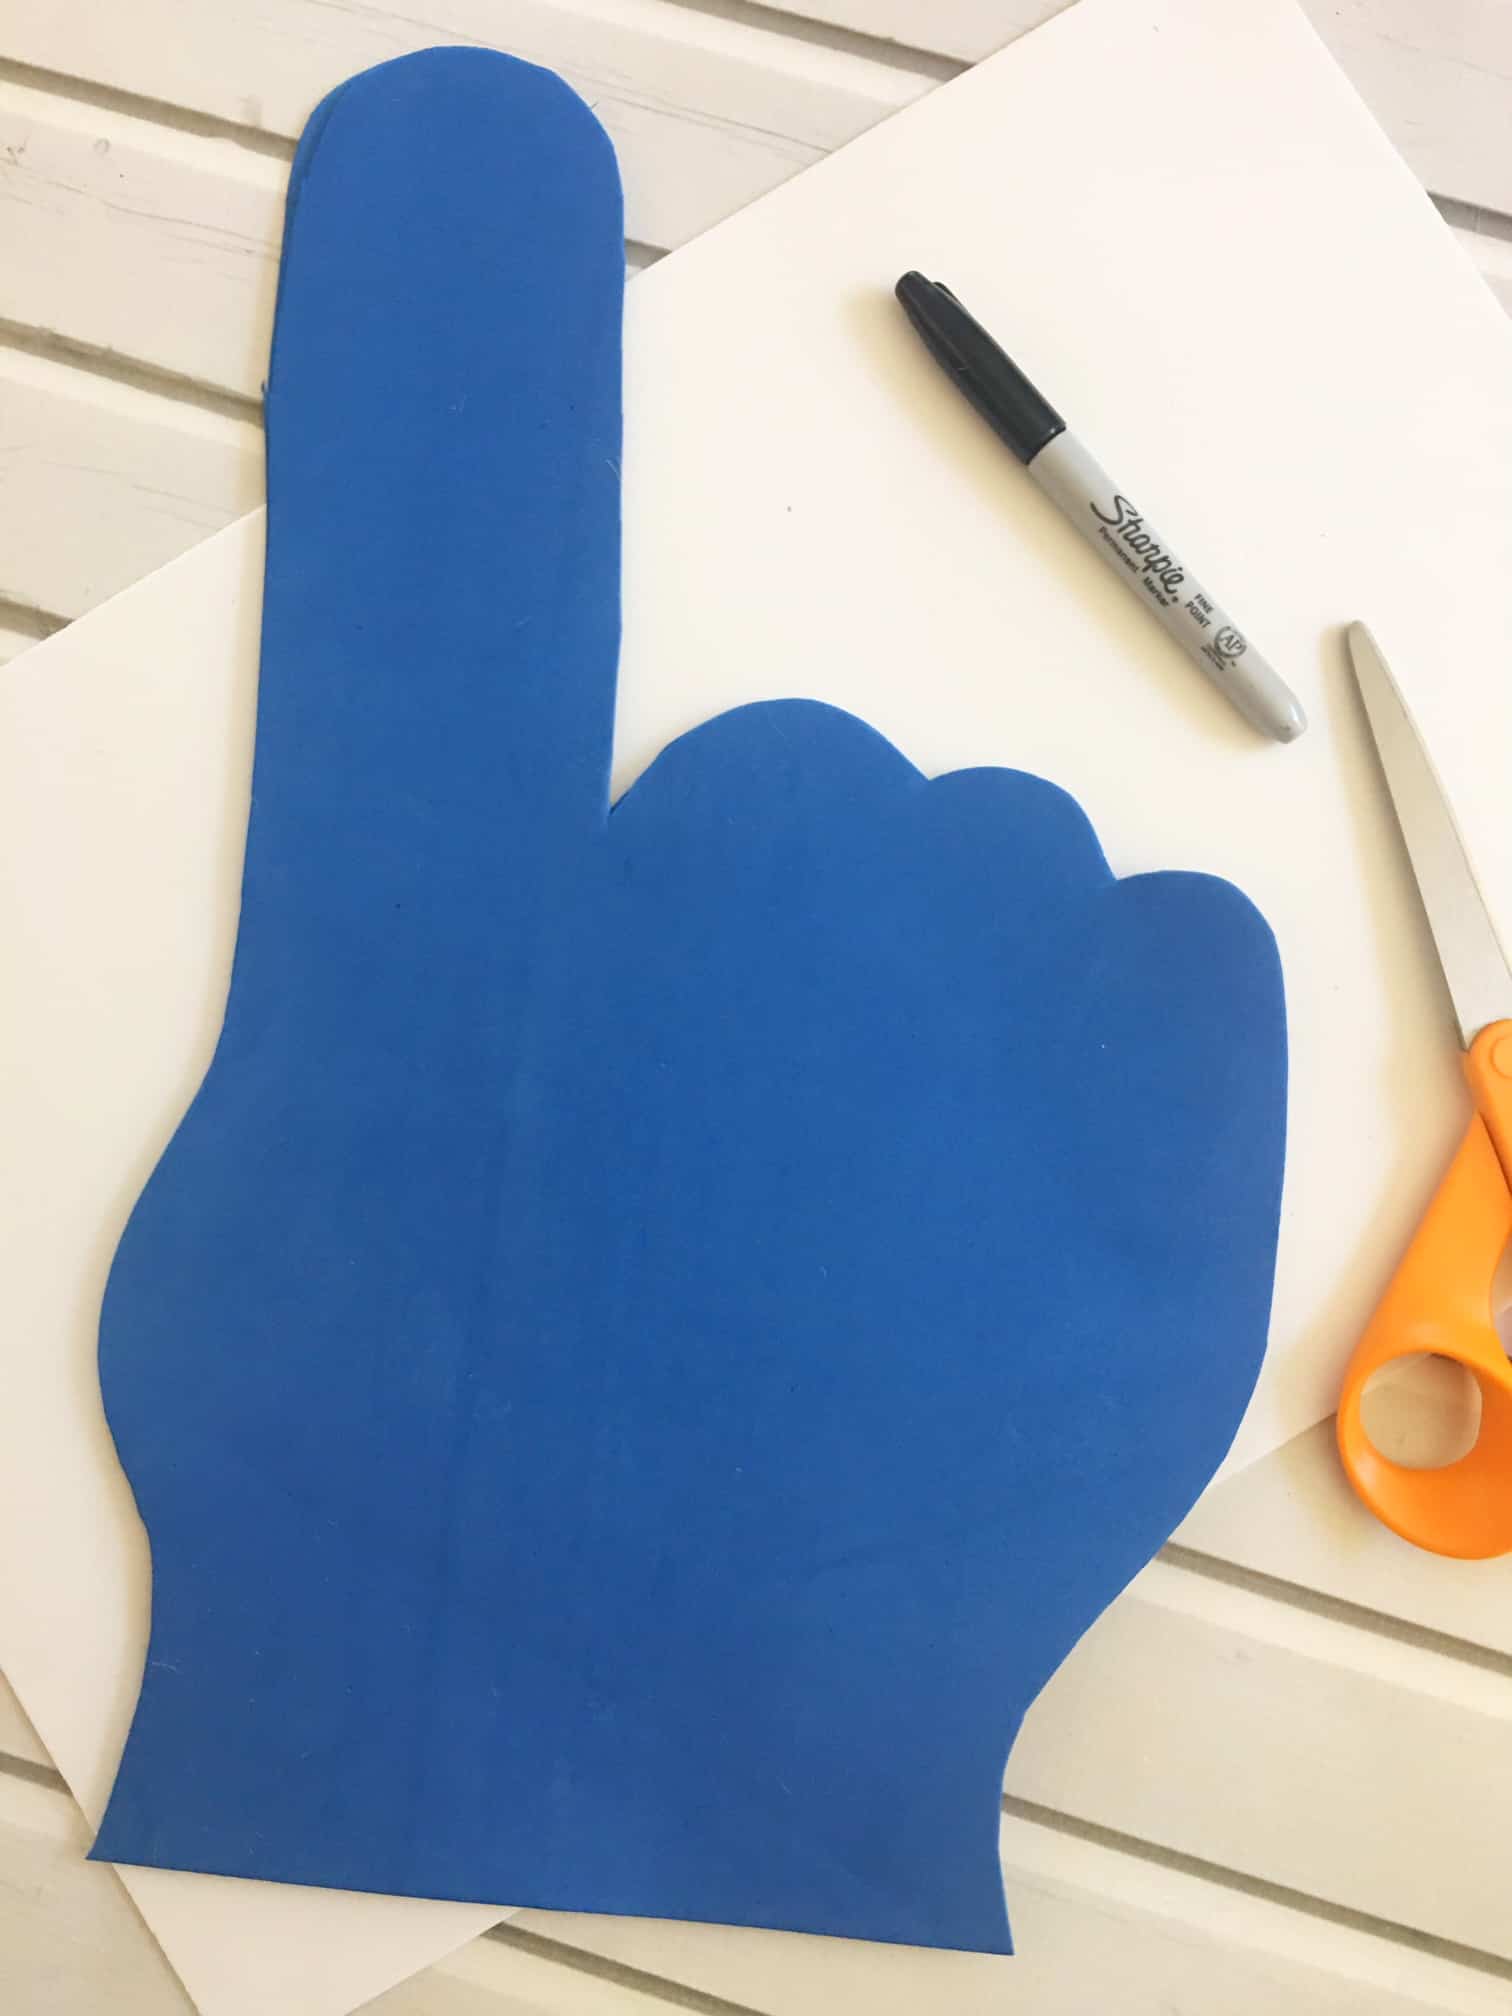 Make your own Foam Finger with these easy DIY instructions! GO TEAM GO!